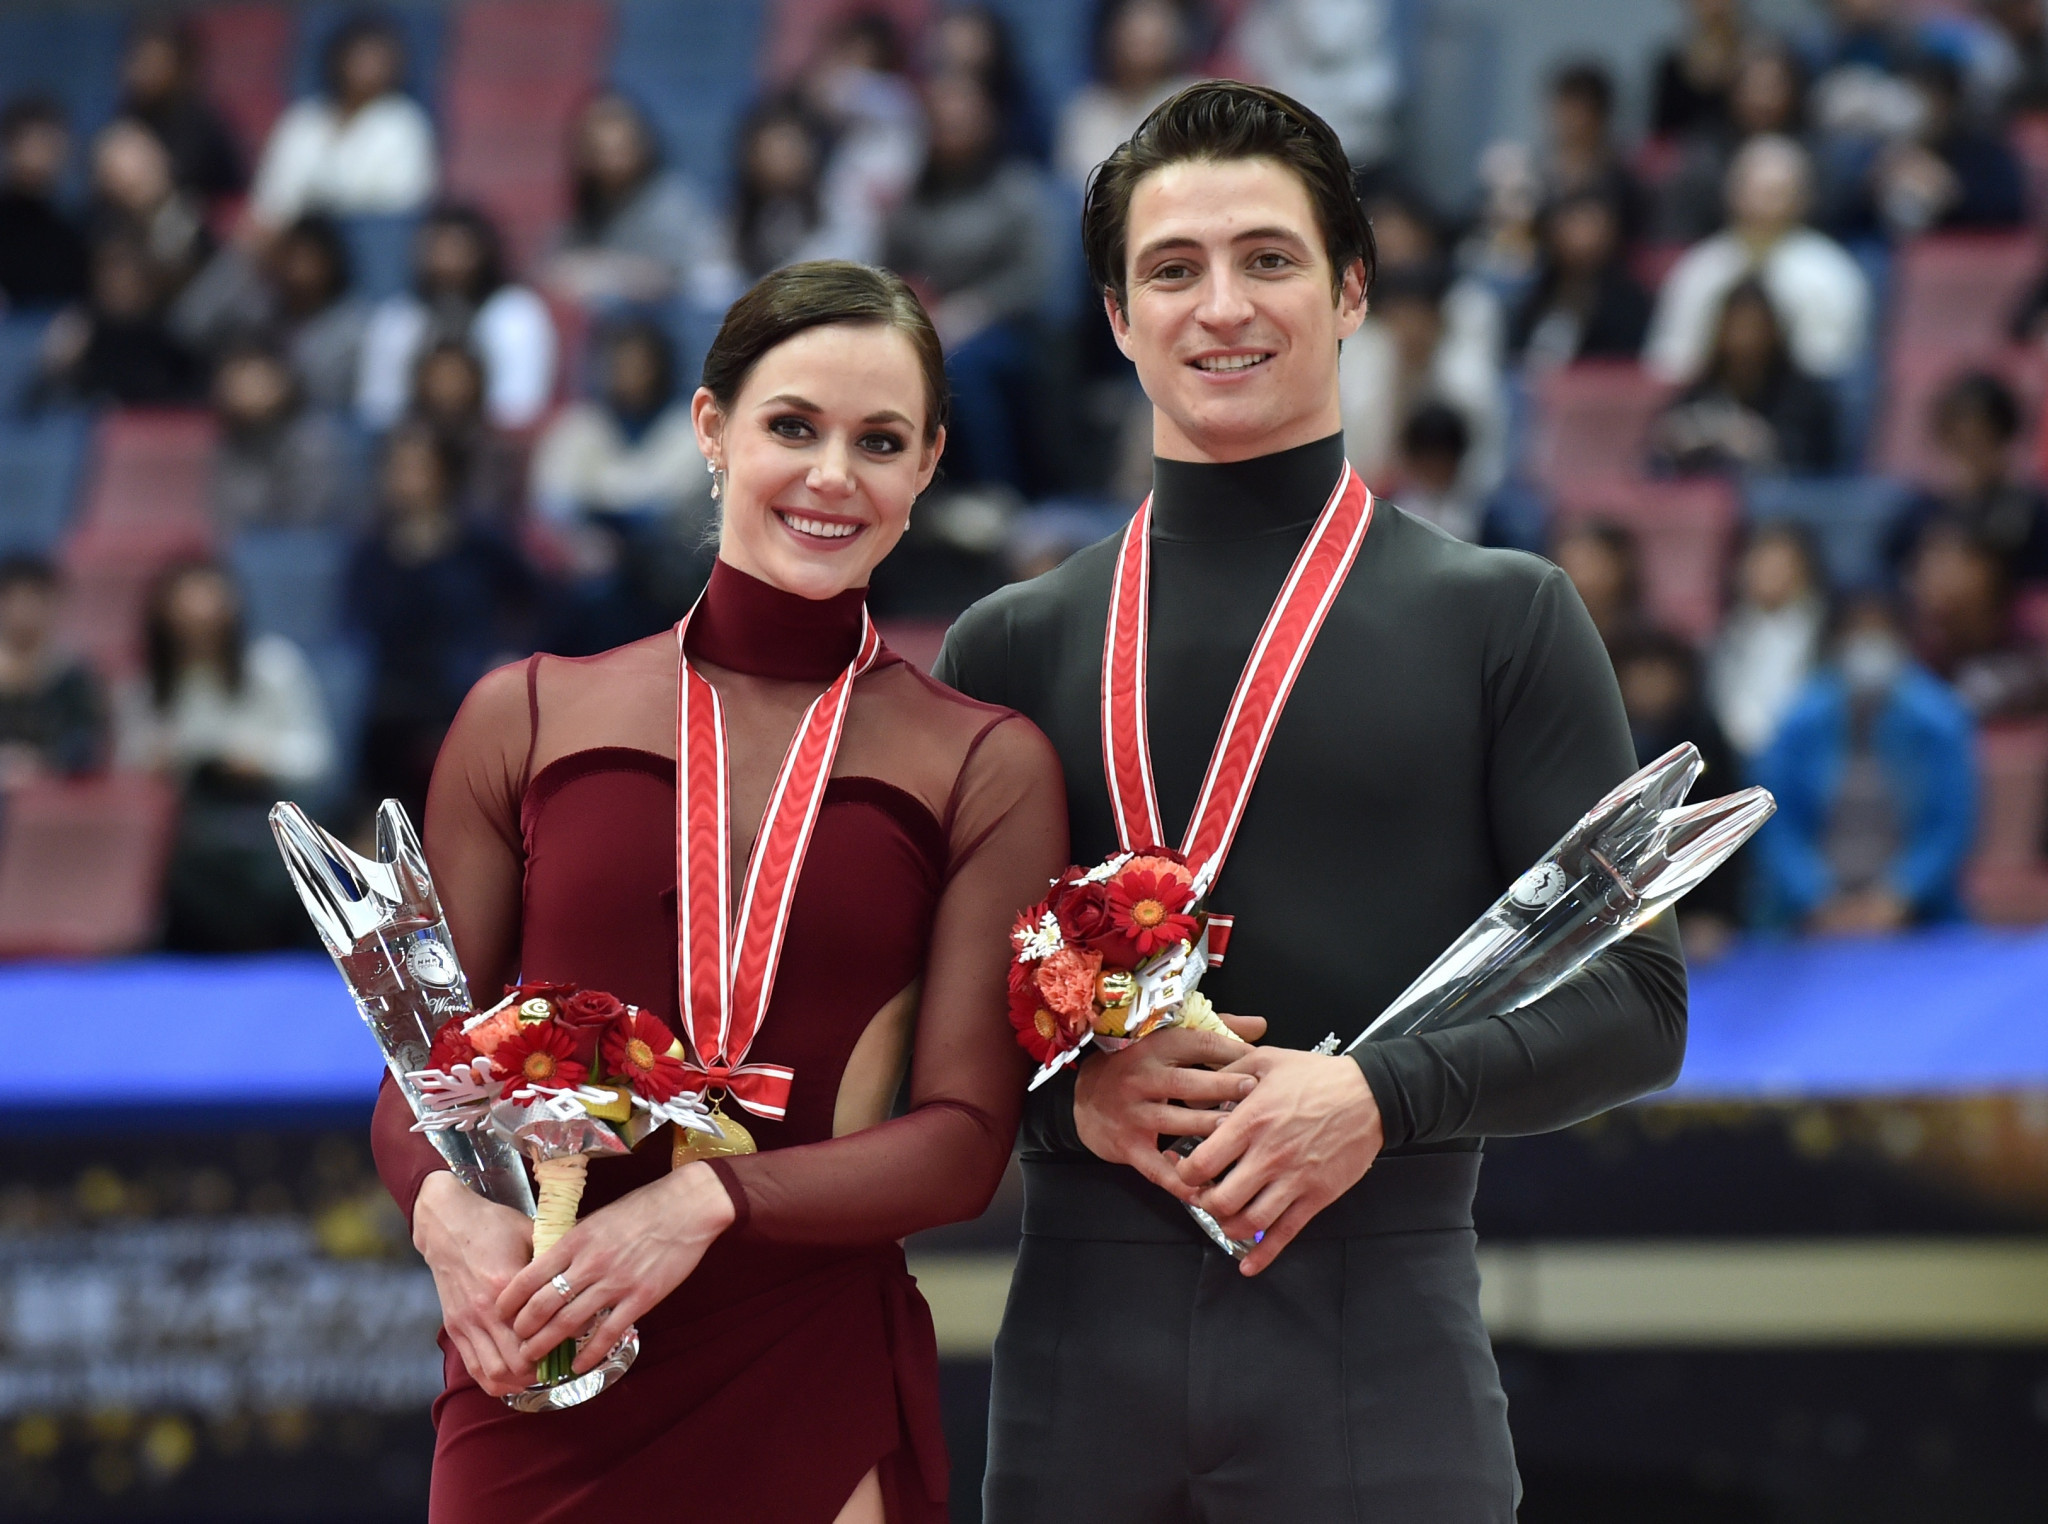 Tessa Virtue and Scott Moir, of Canada, pose on the podium during the awards ceremony for the ice dance free dance event of the Grand Prix of Figure Skating 2017/2018 NHK Trophy in Osaka ©Getty Images